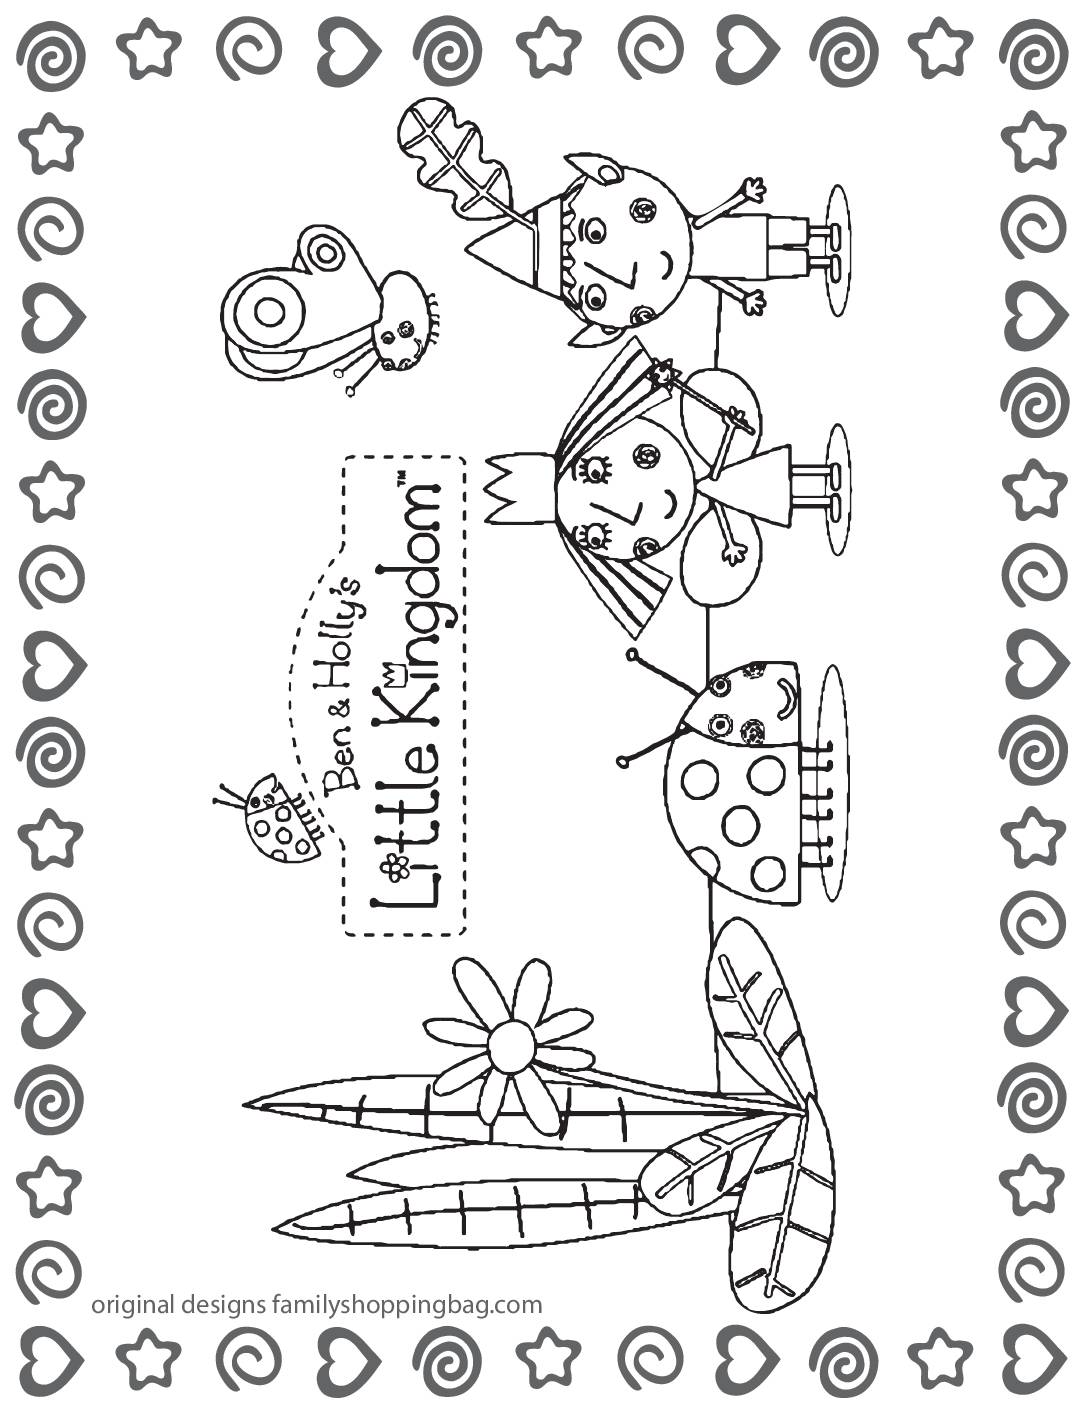 Coloring Page 1 Ben & Holly Coloring Pages